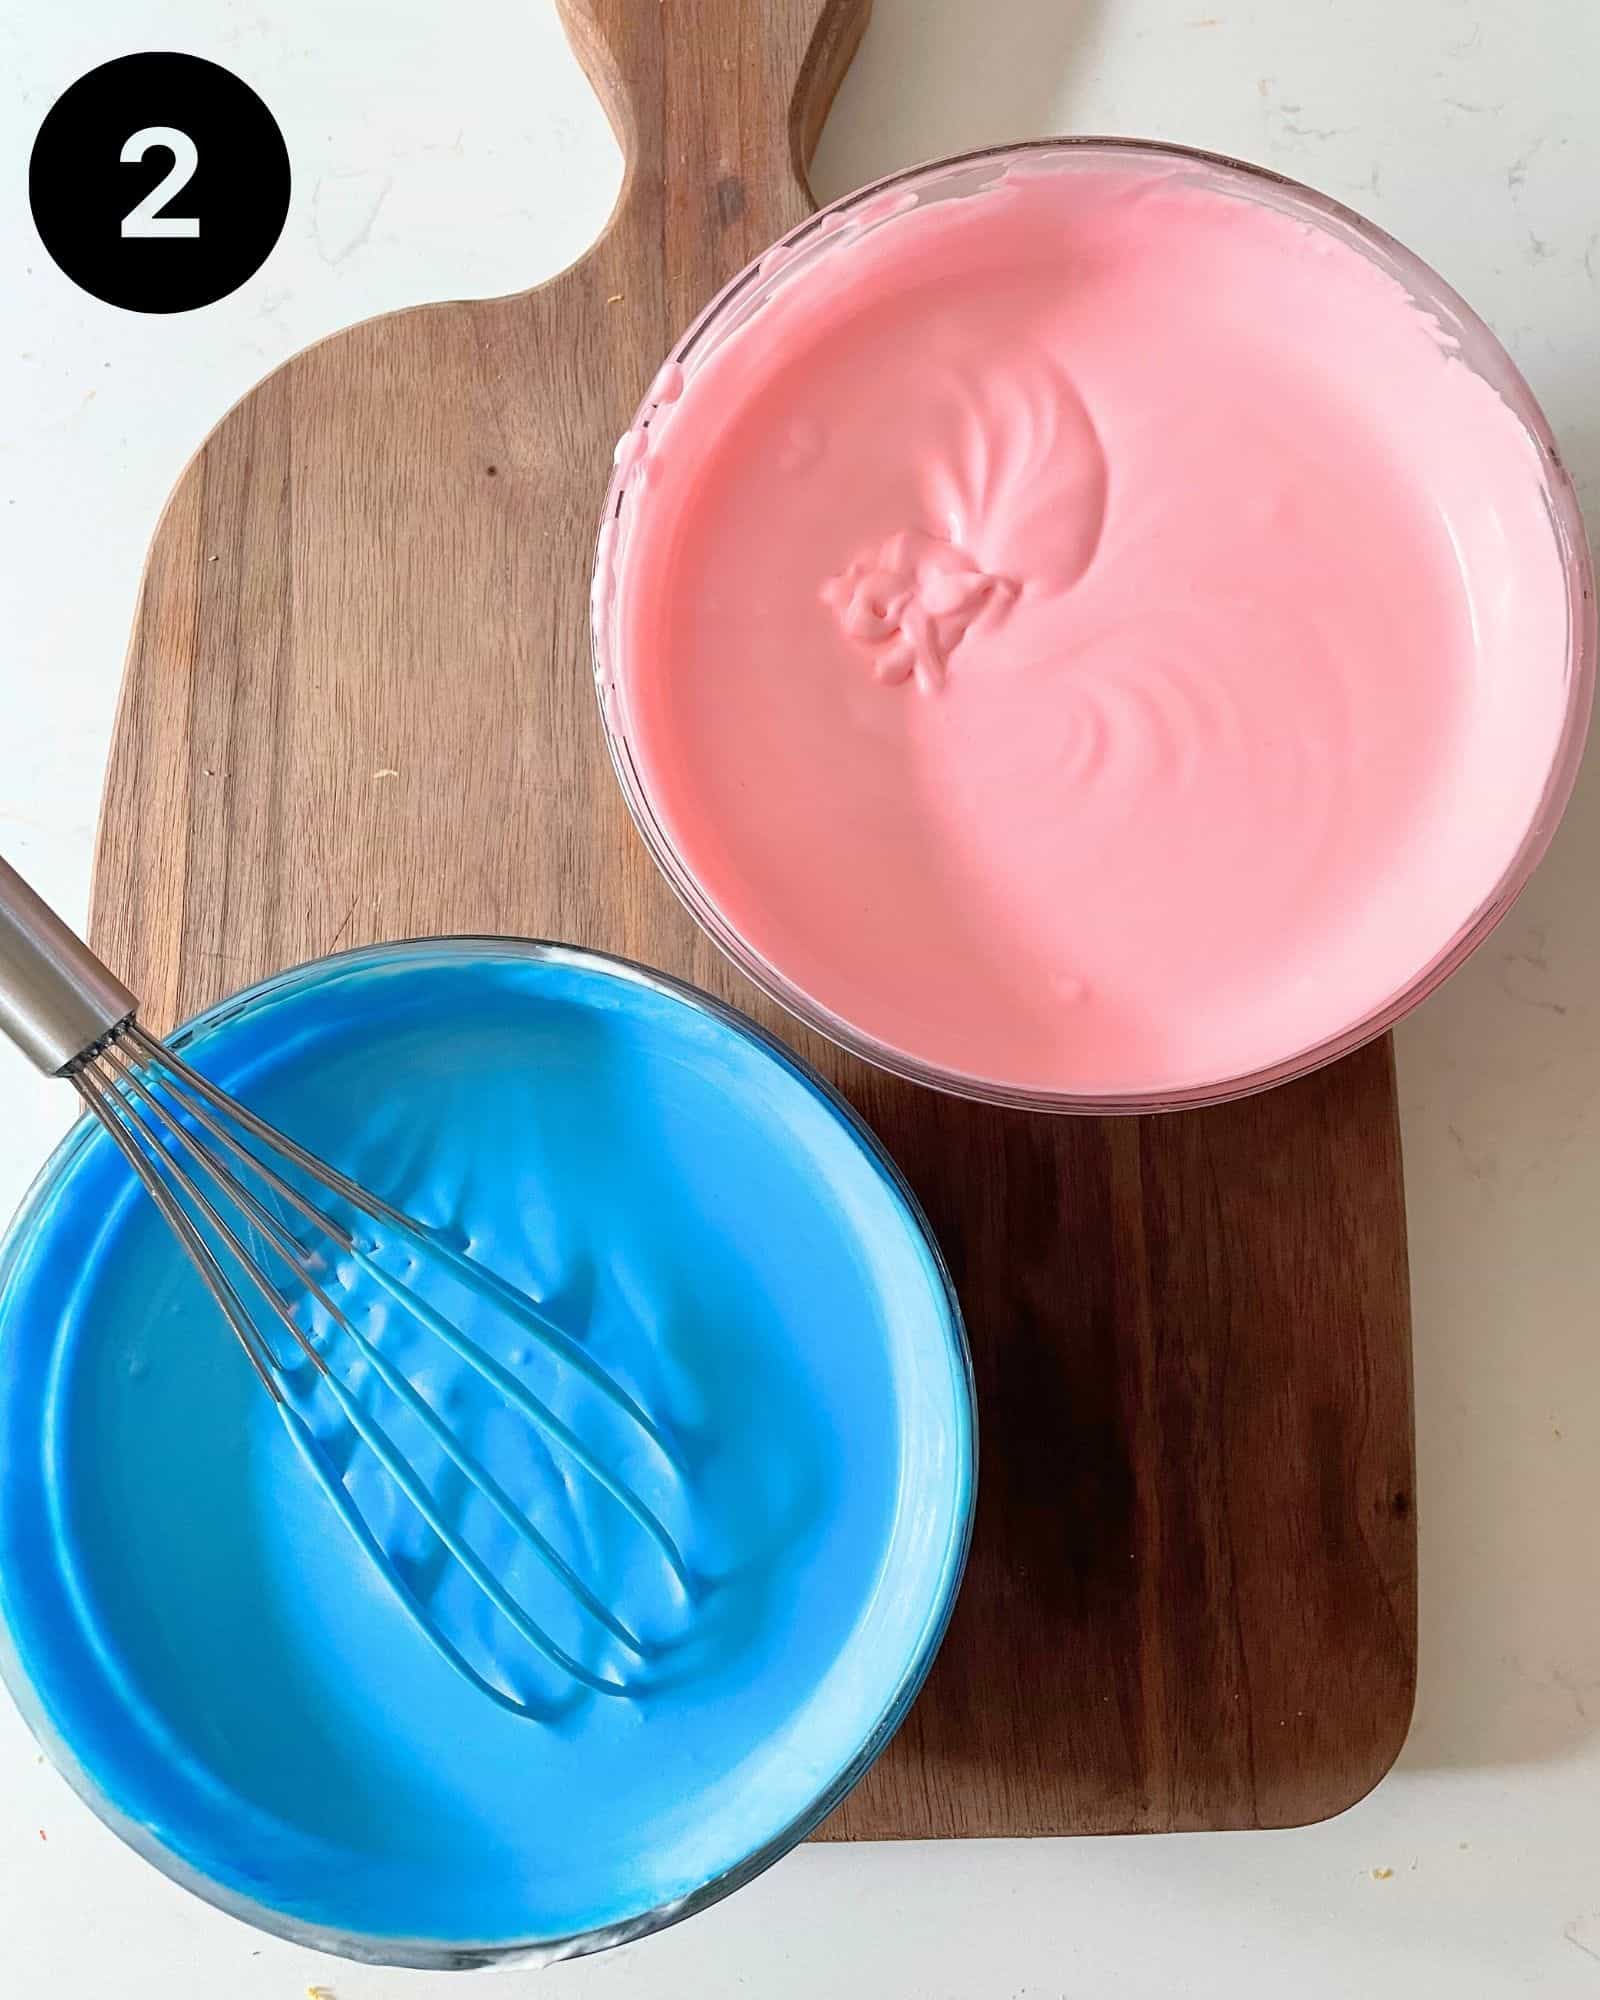 cotton candy ice cream divided into two bowls. one bowl with pink food coloring and the other bowl with blue food coloring.